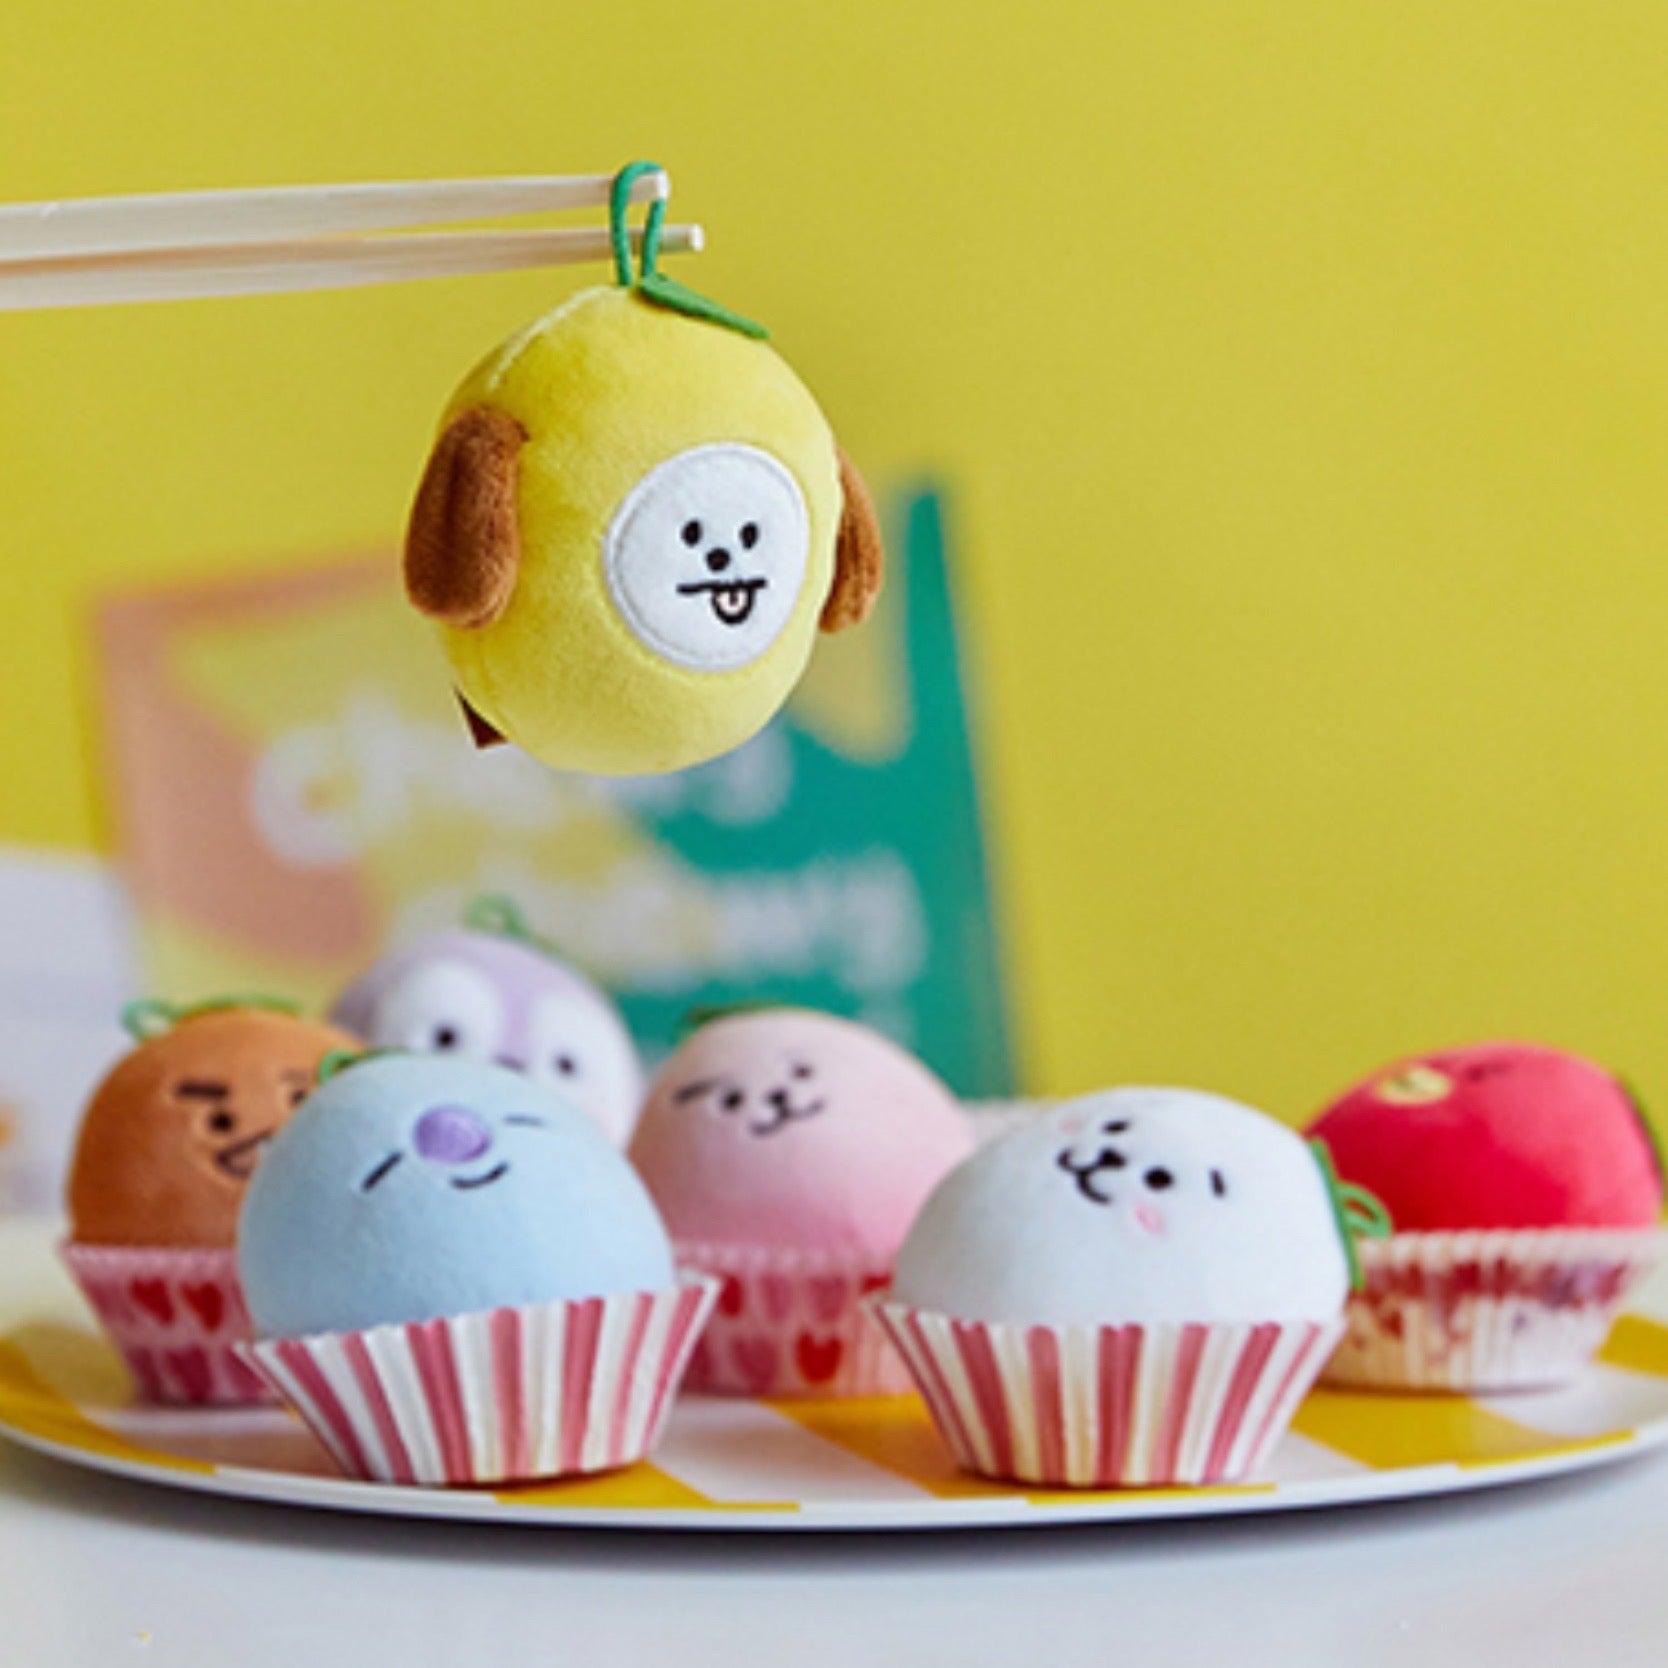 BT21 CHIMMY Official Chewy Chewy Sticky Rice Cake Plush Set – K-STAR